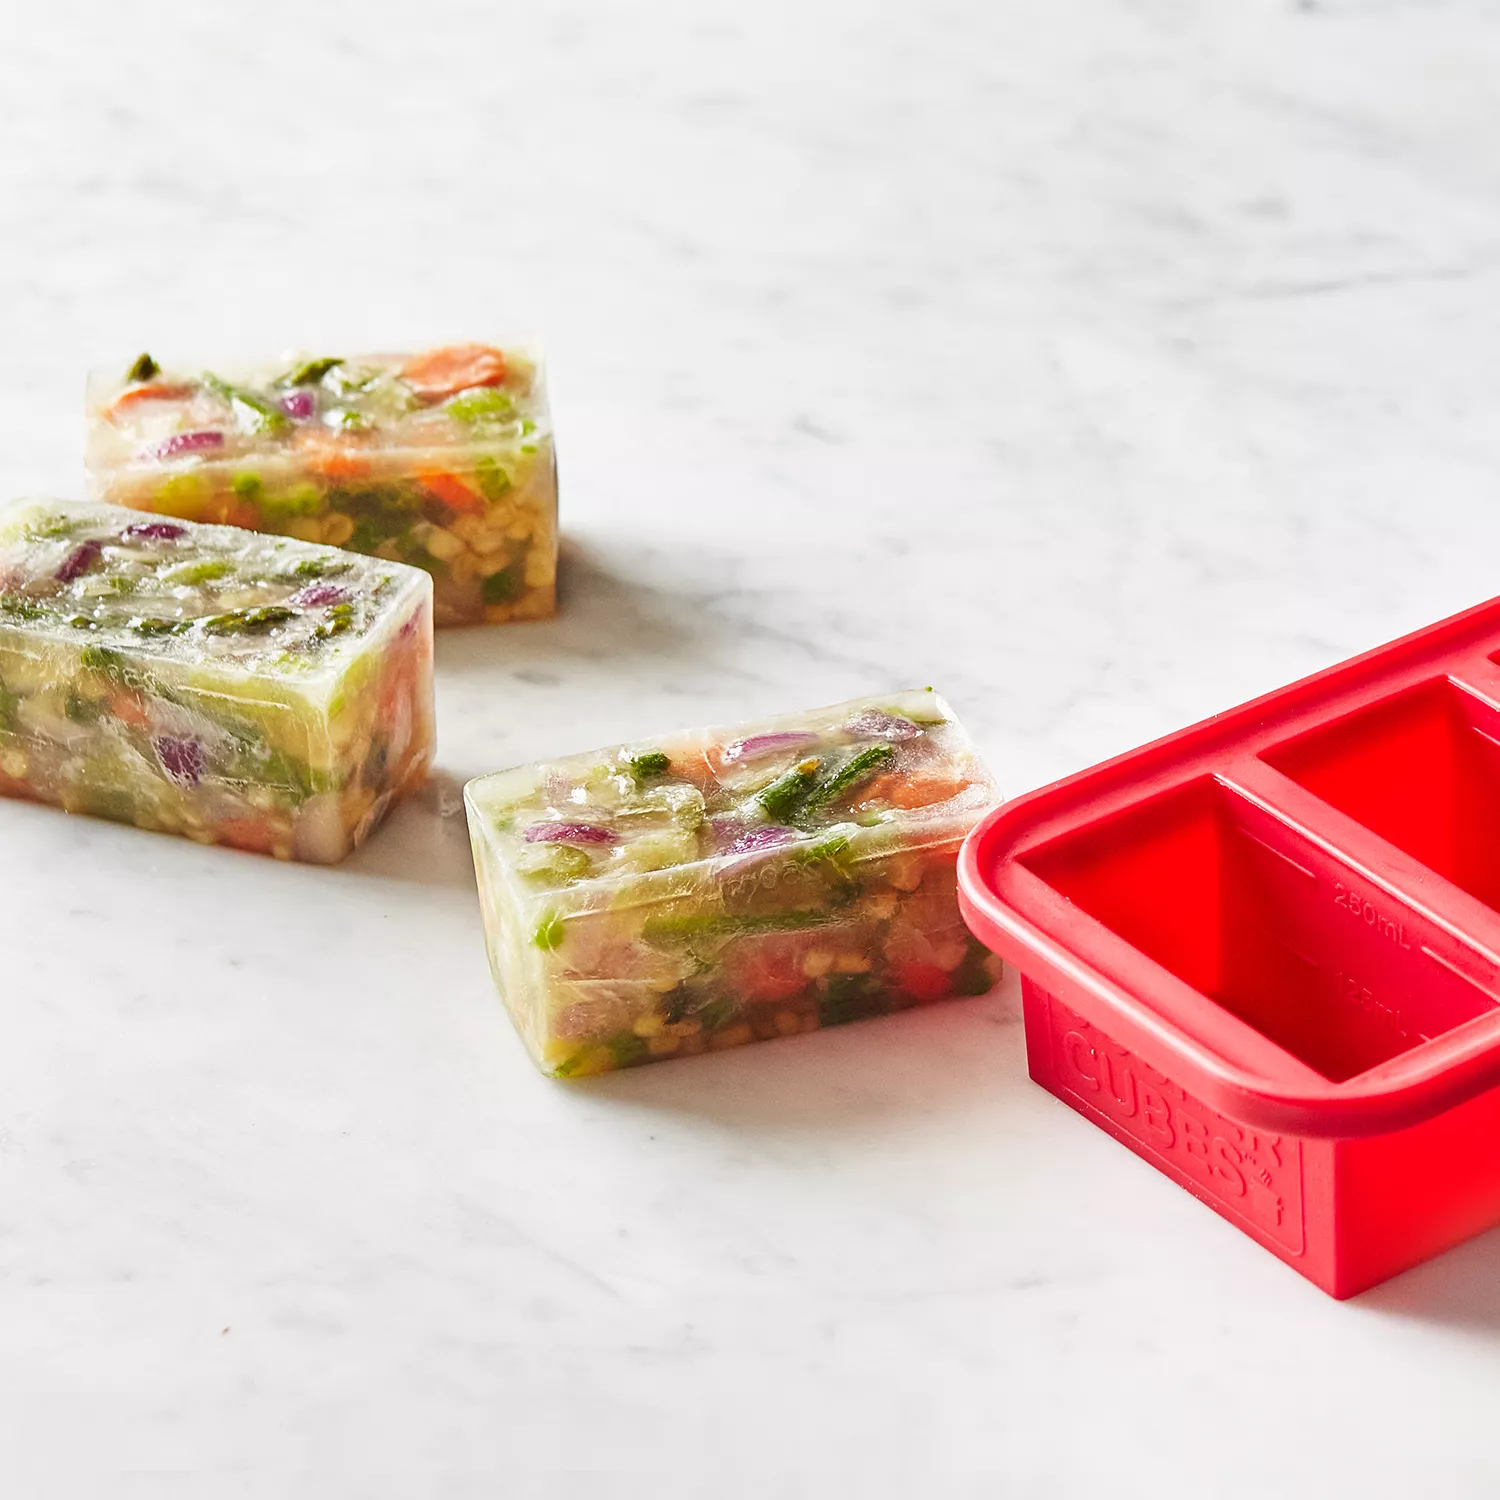 Silicone Freezer Tray Soup 4 Cubes Food Freezing Container Molds with Lid  Frozen Packaging Box